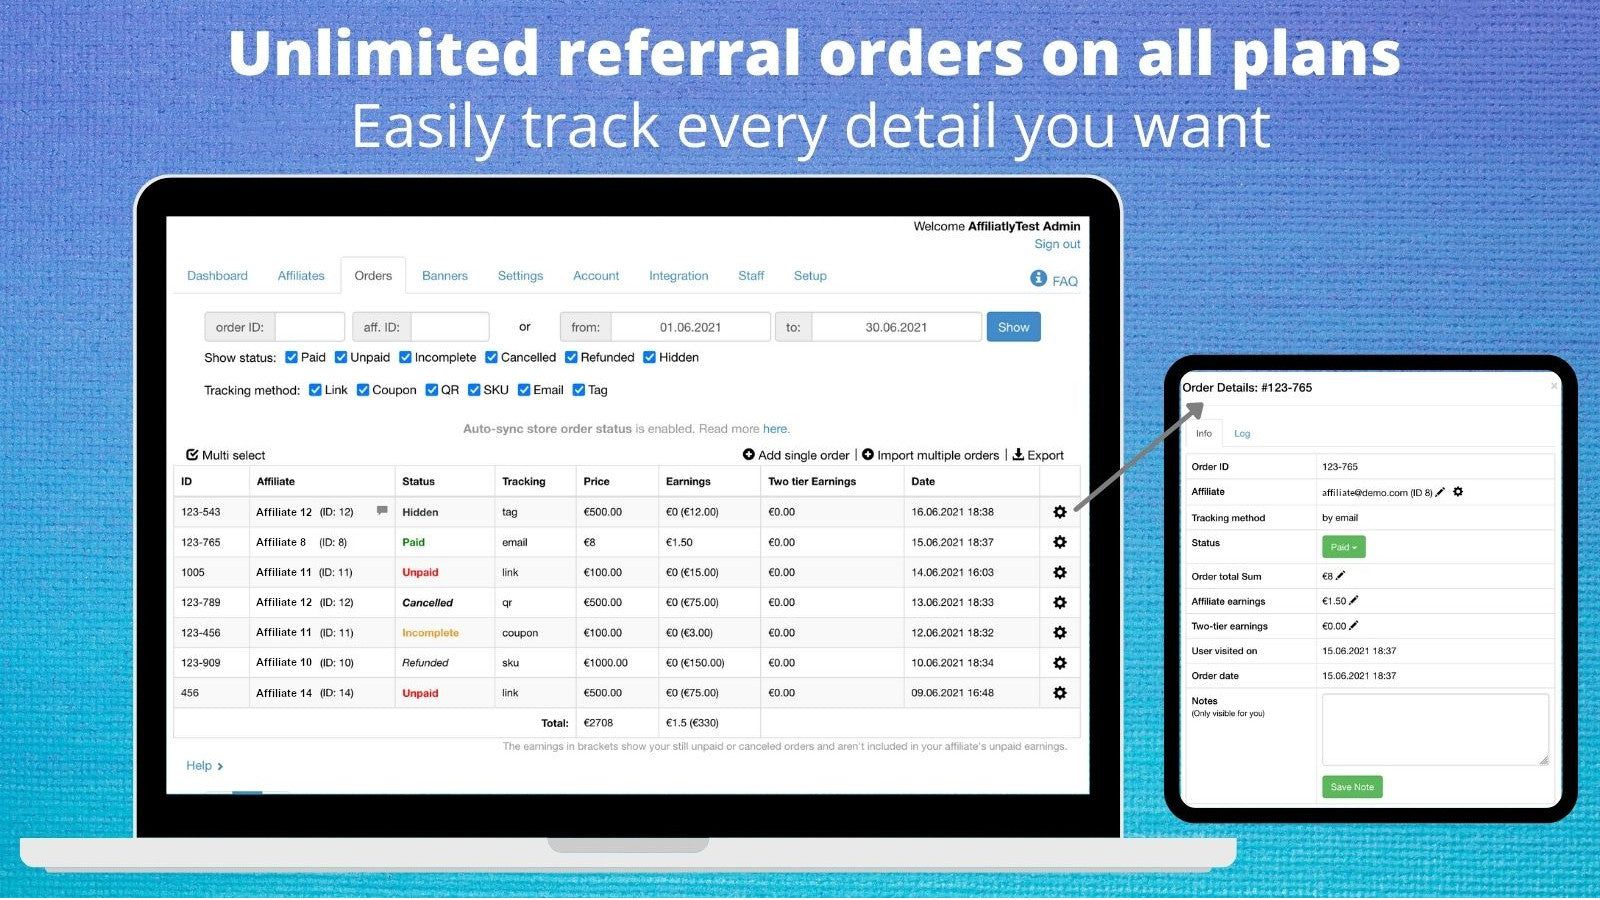 Unlimited referral orders - Track every detail of your referrals